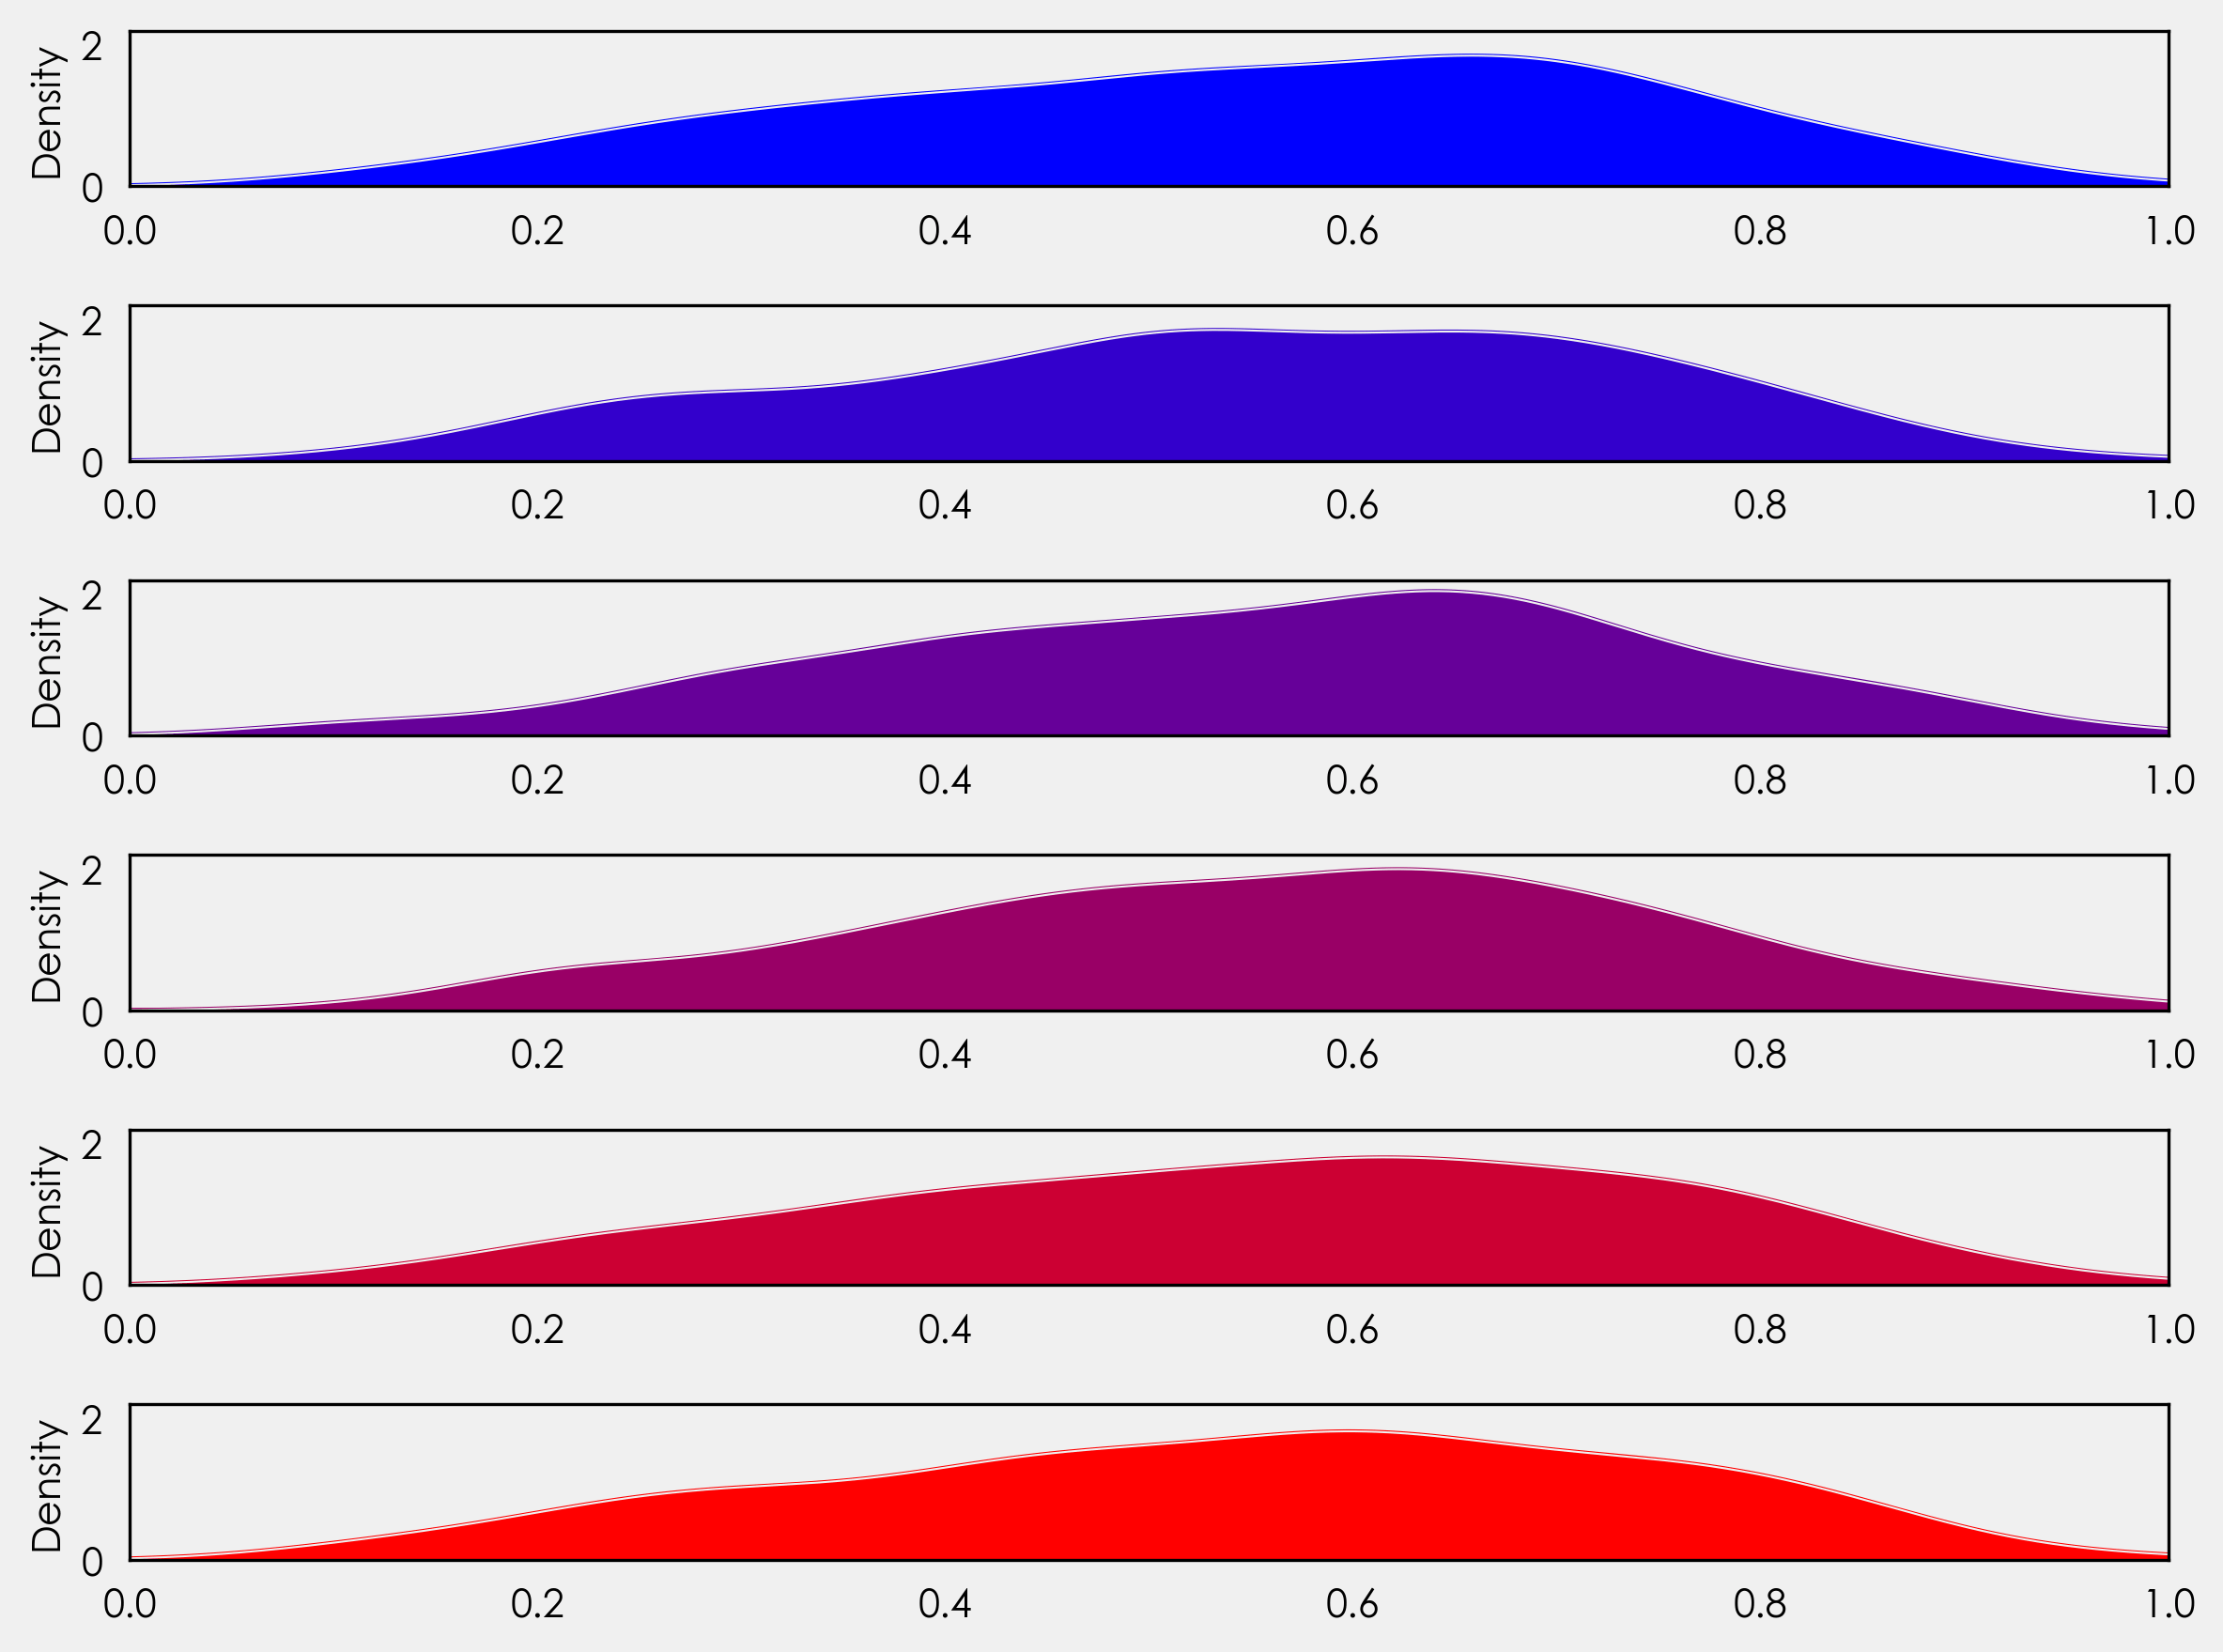 6 kernel density estimate (KDE) charts, each with different shades ranging from blue to blood red.